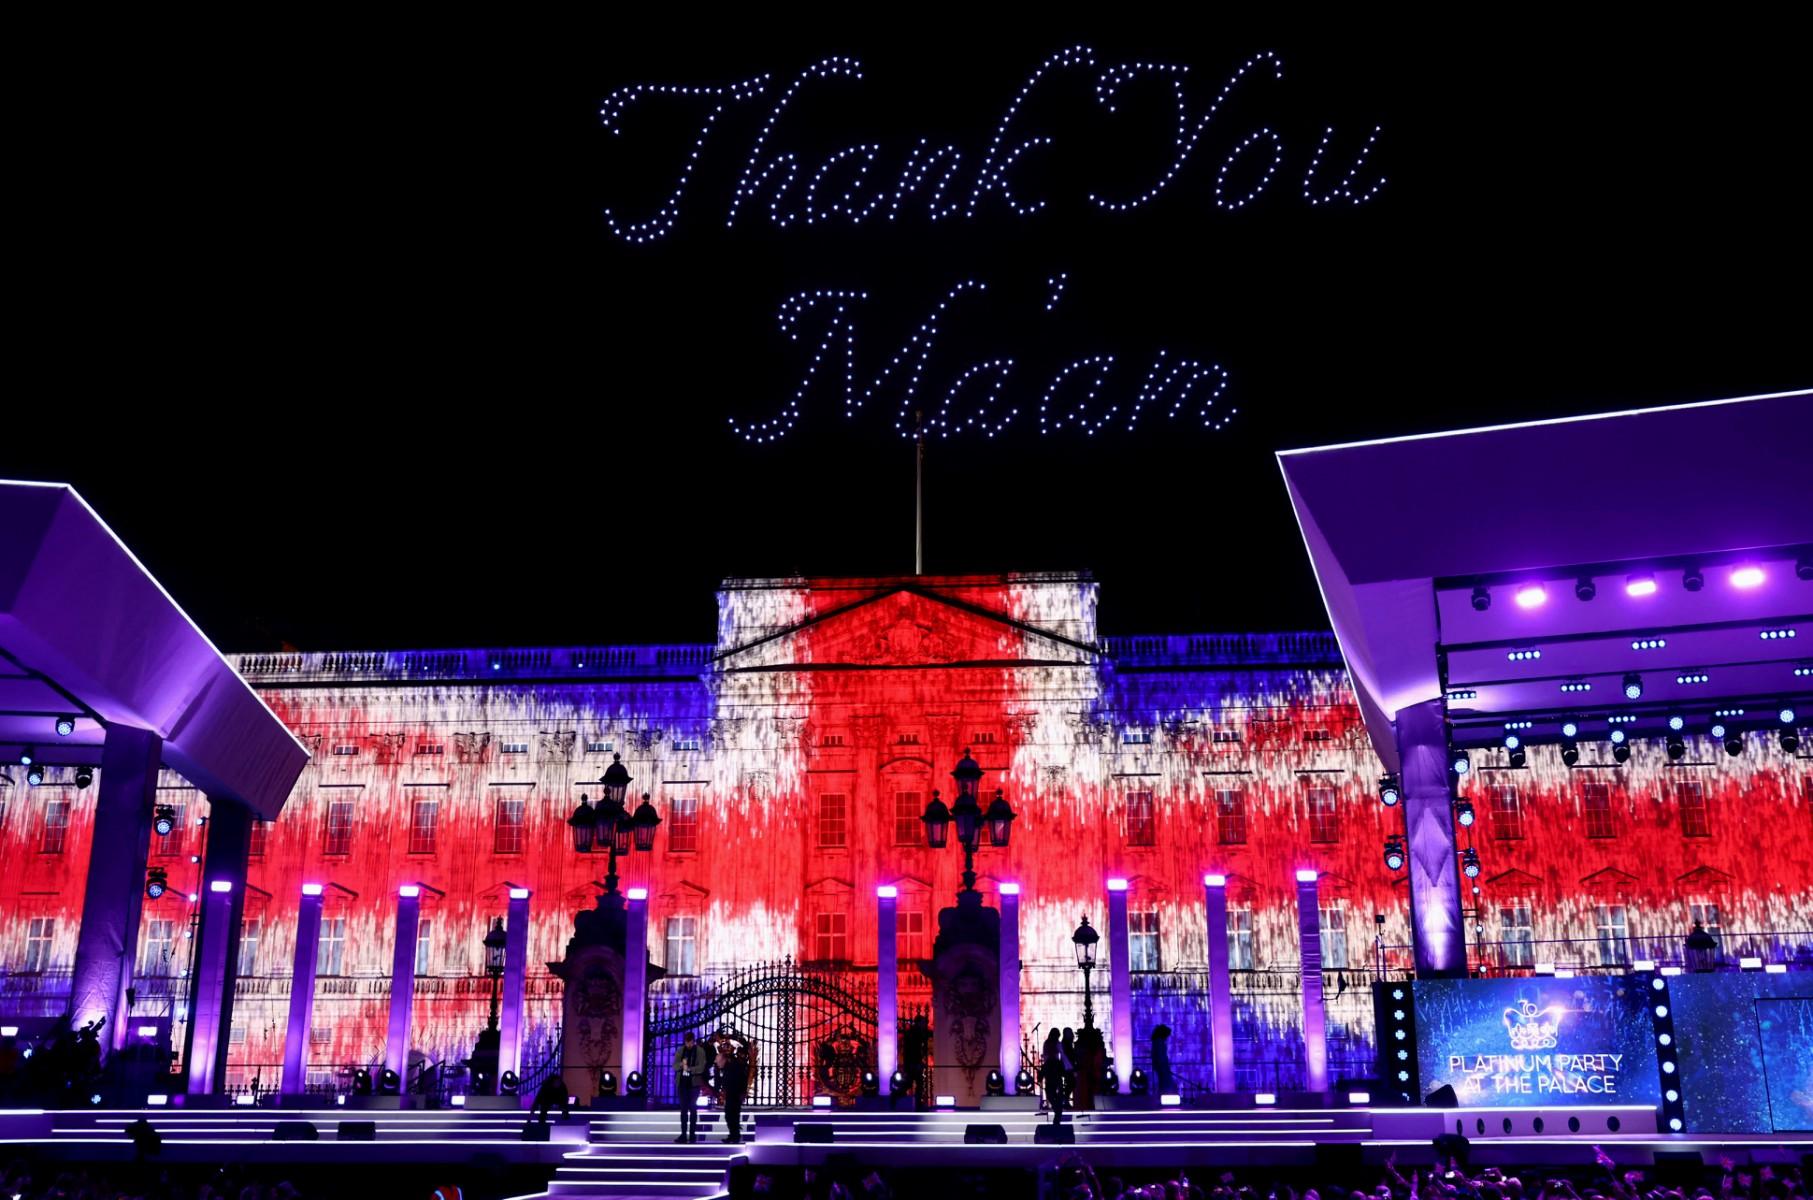 'Thank you Ma'am' is projected in the sky by drone at the end of the Platinum Party at Buckingham Palace on June 4, as part of Queen Elizabeth II's platinum jubilee celebrations. Photo: AFP